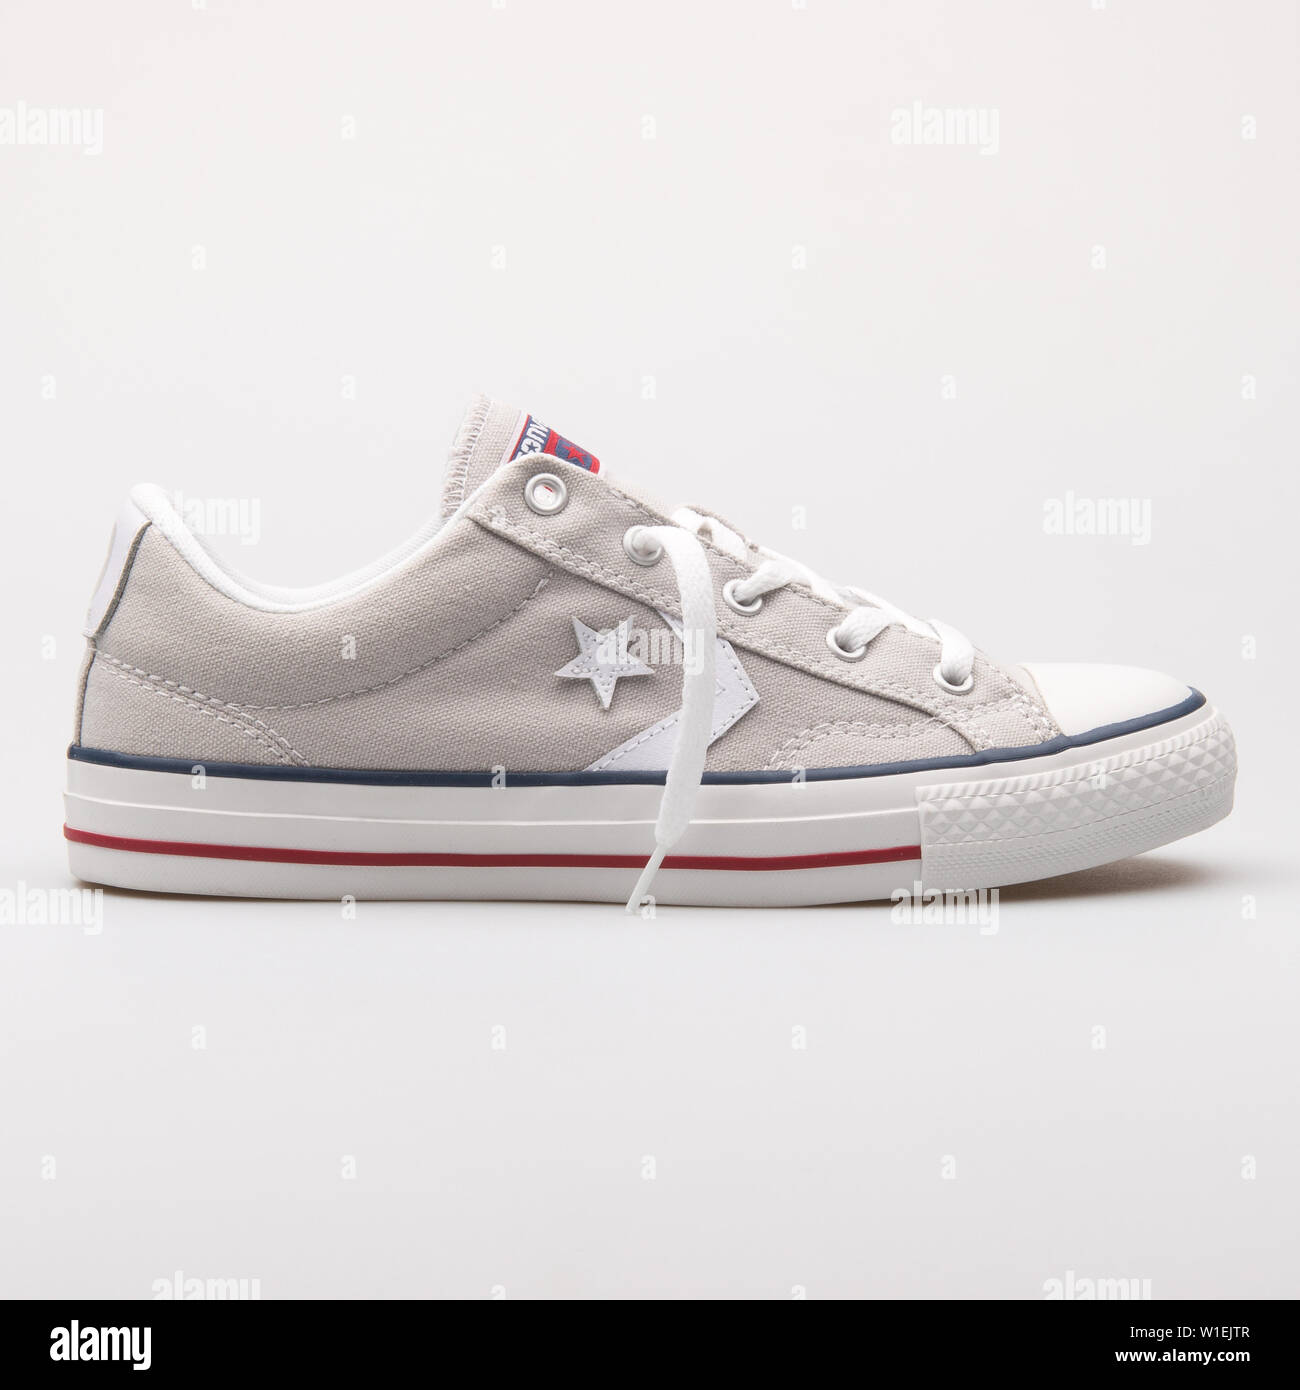 VIENNA, AUSTRIA - AUGUST 23, 2017: Converse Chuck Taylor All Star Player OX  cloud grey sneaker on white background Stock Photo - Alamy